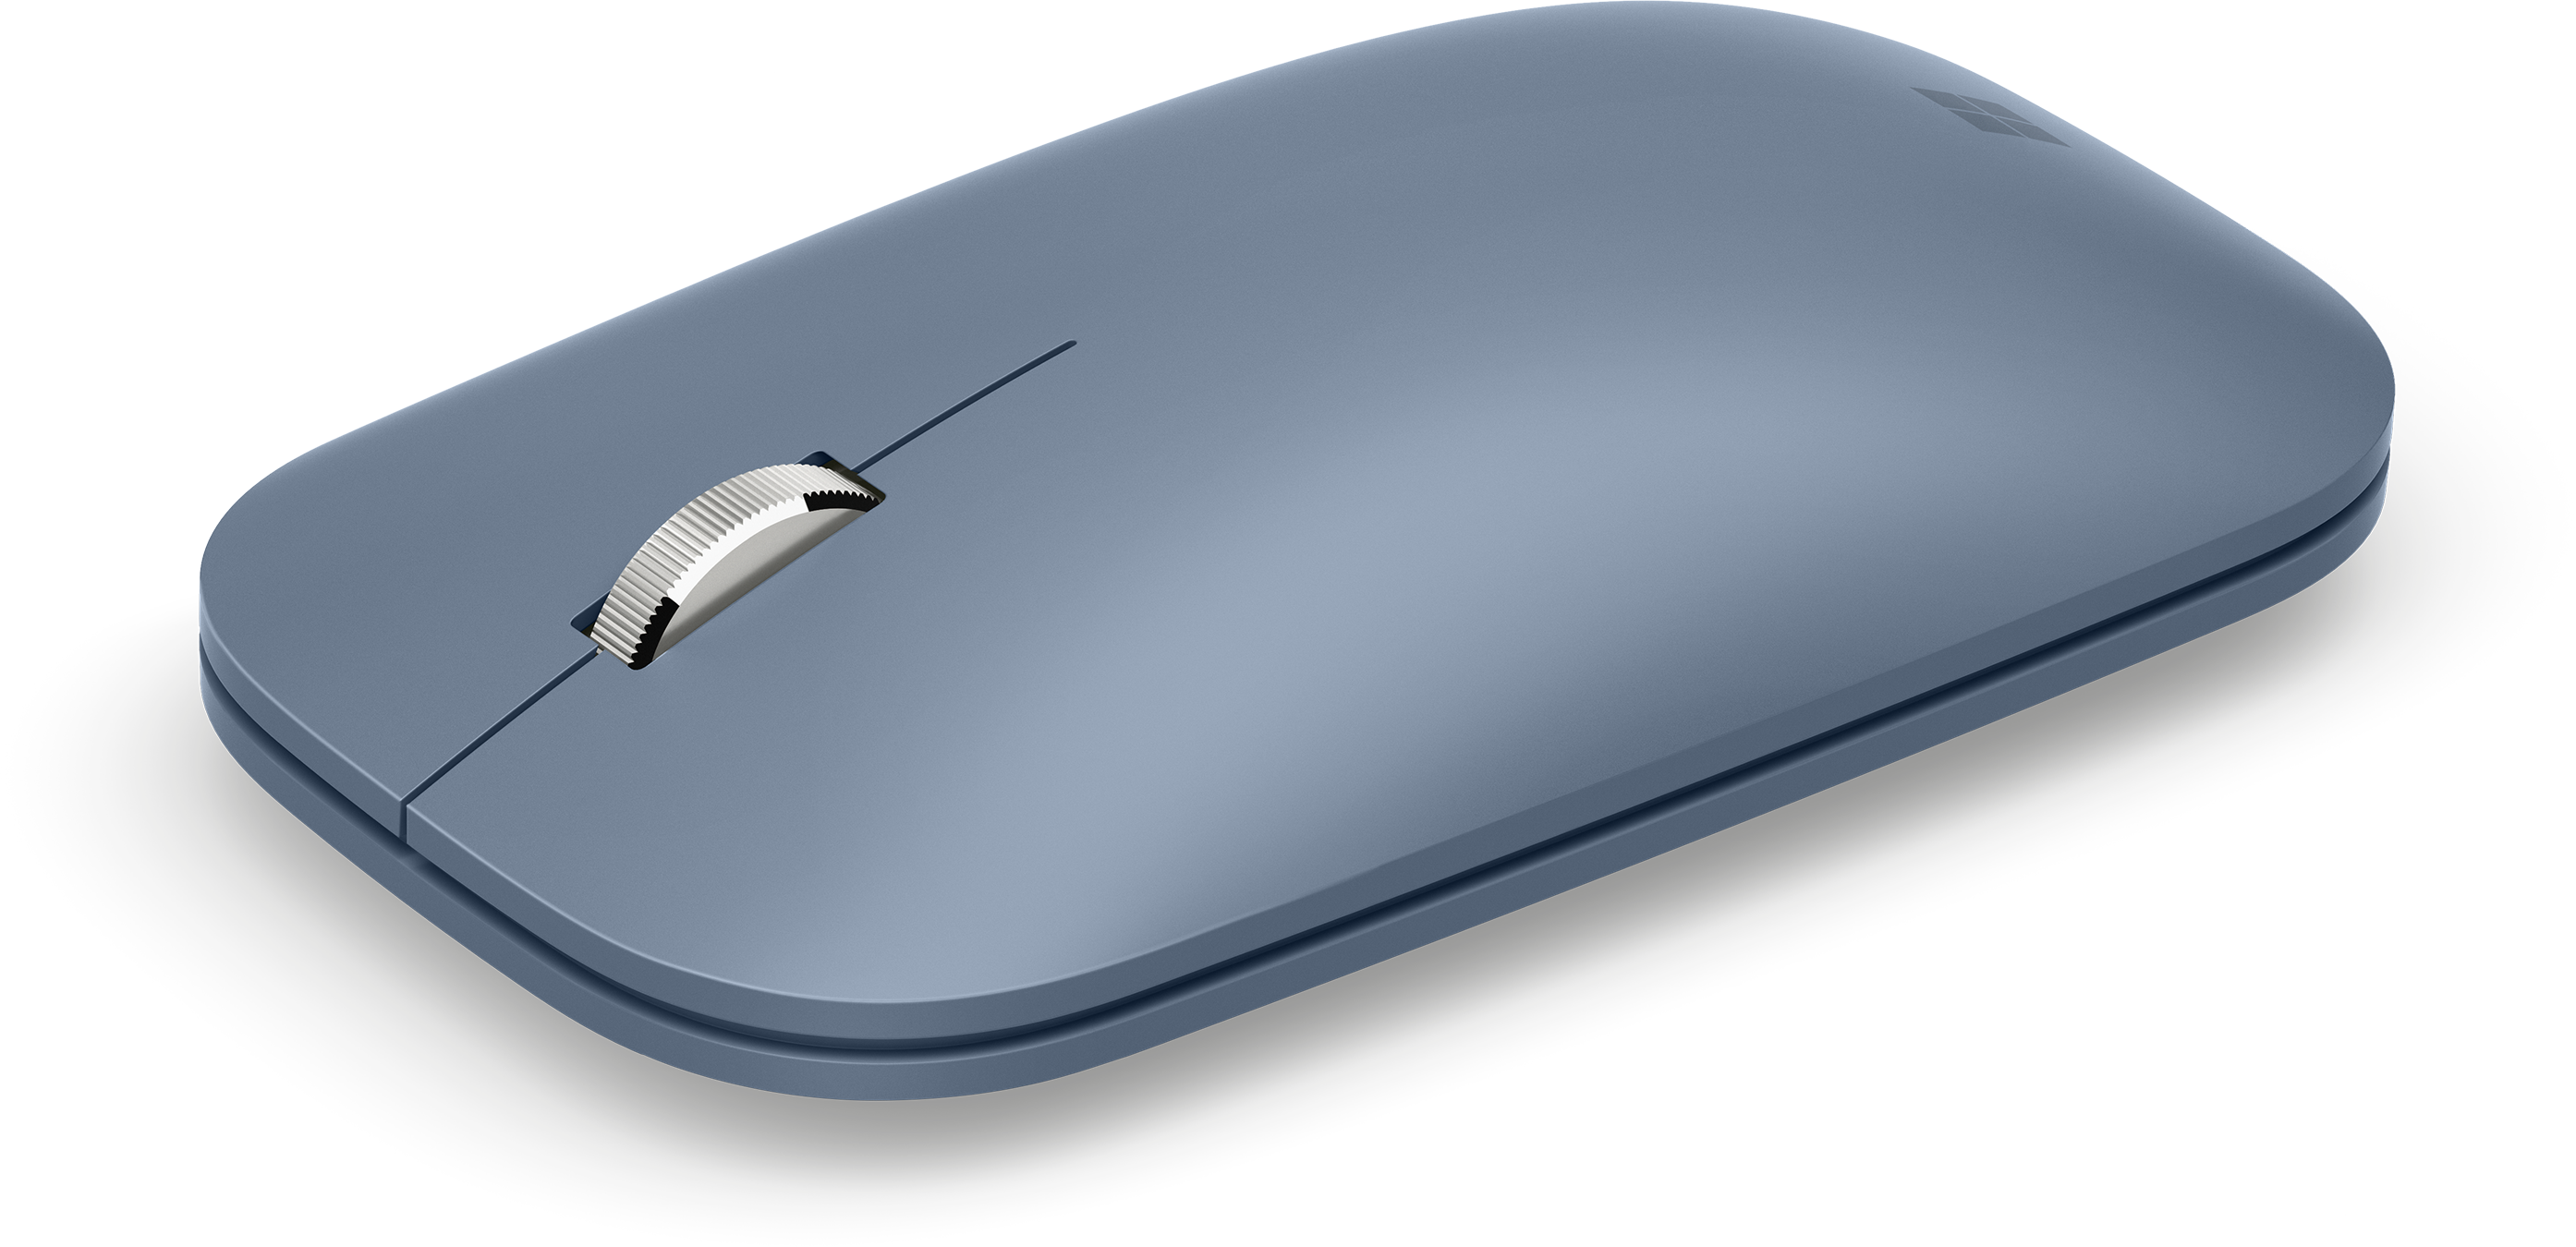 Surface Mobile Mouse(Microsoft)格安通販ランキング